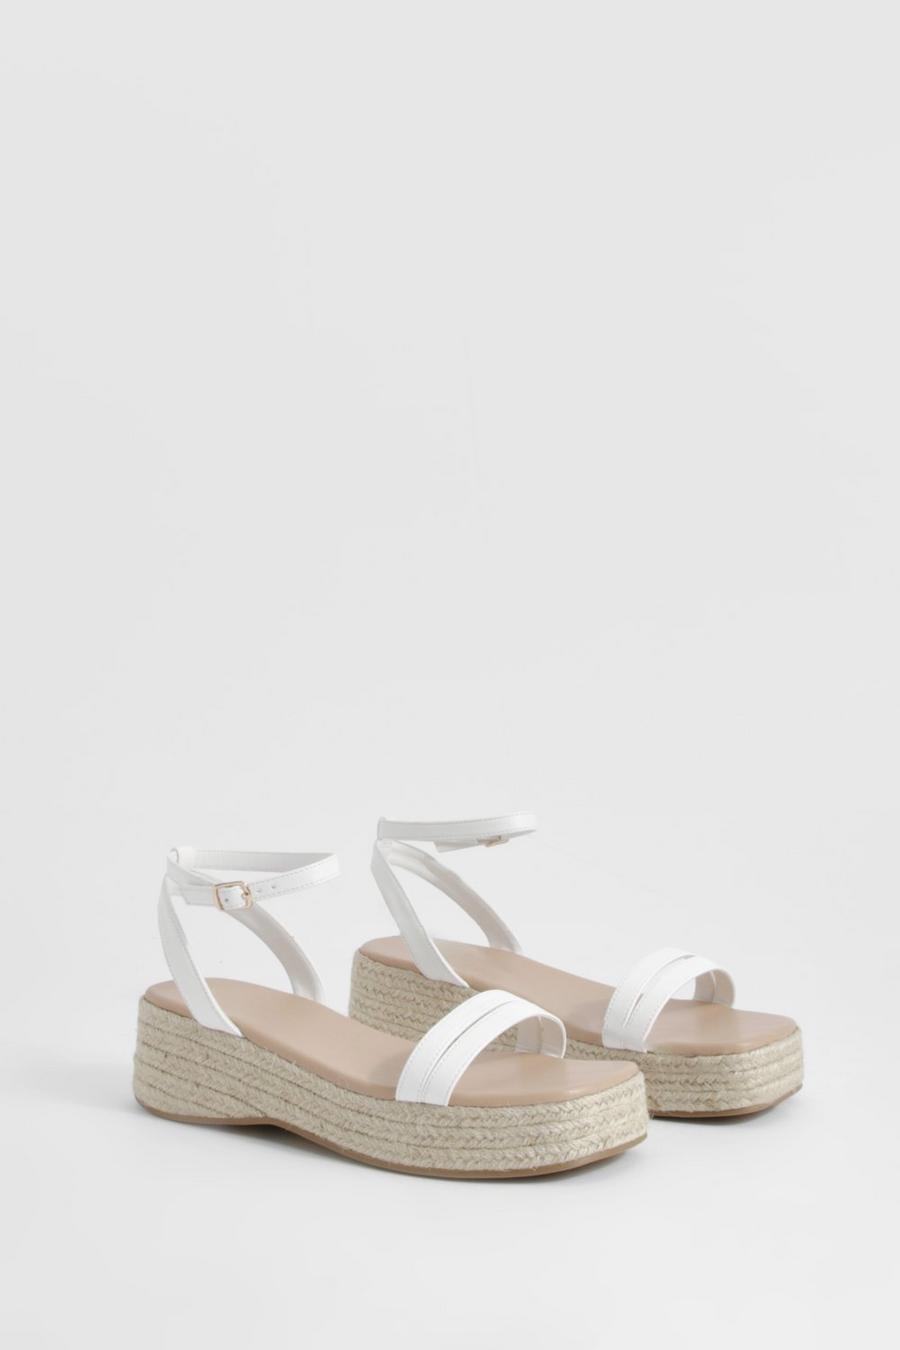 Wide Fit Sandals, Wide Fit Wedge Sandals